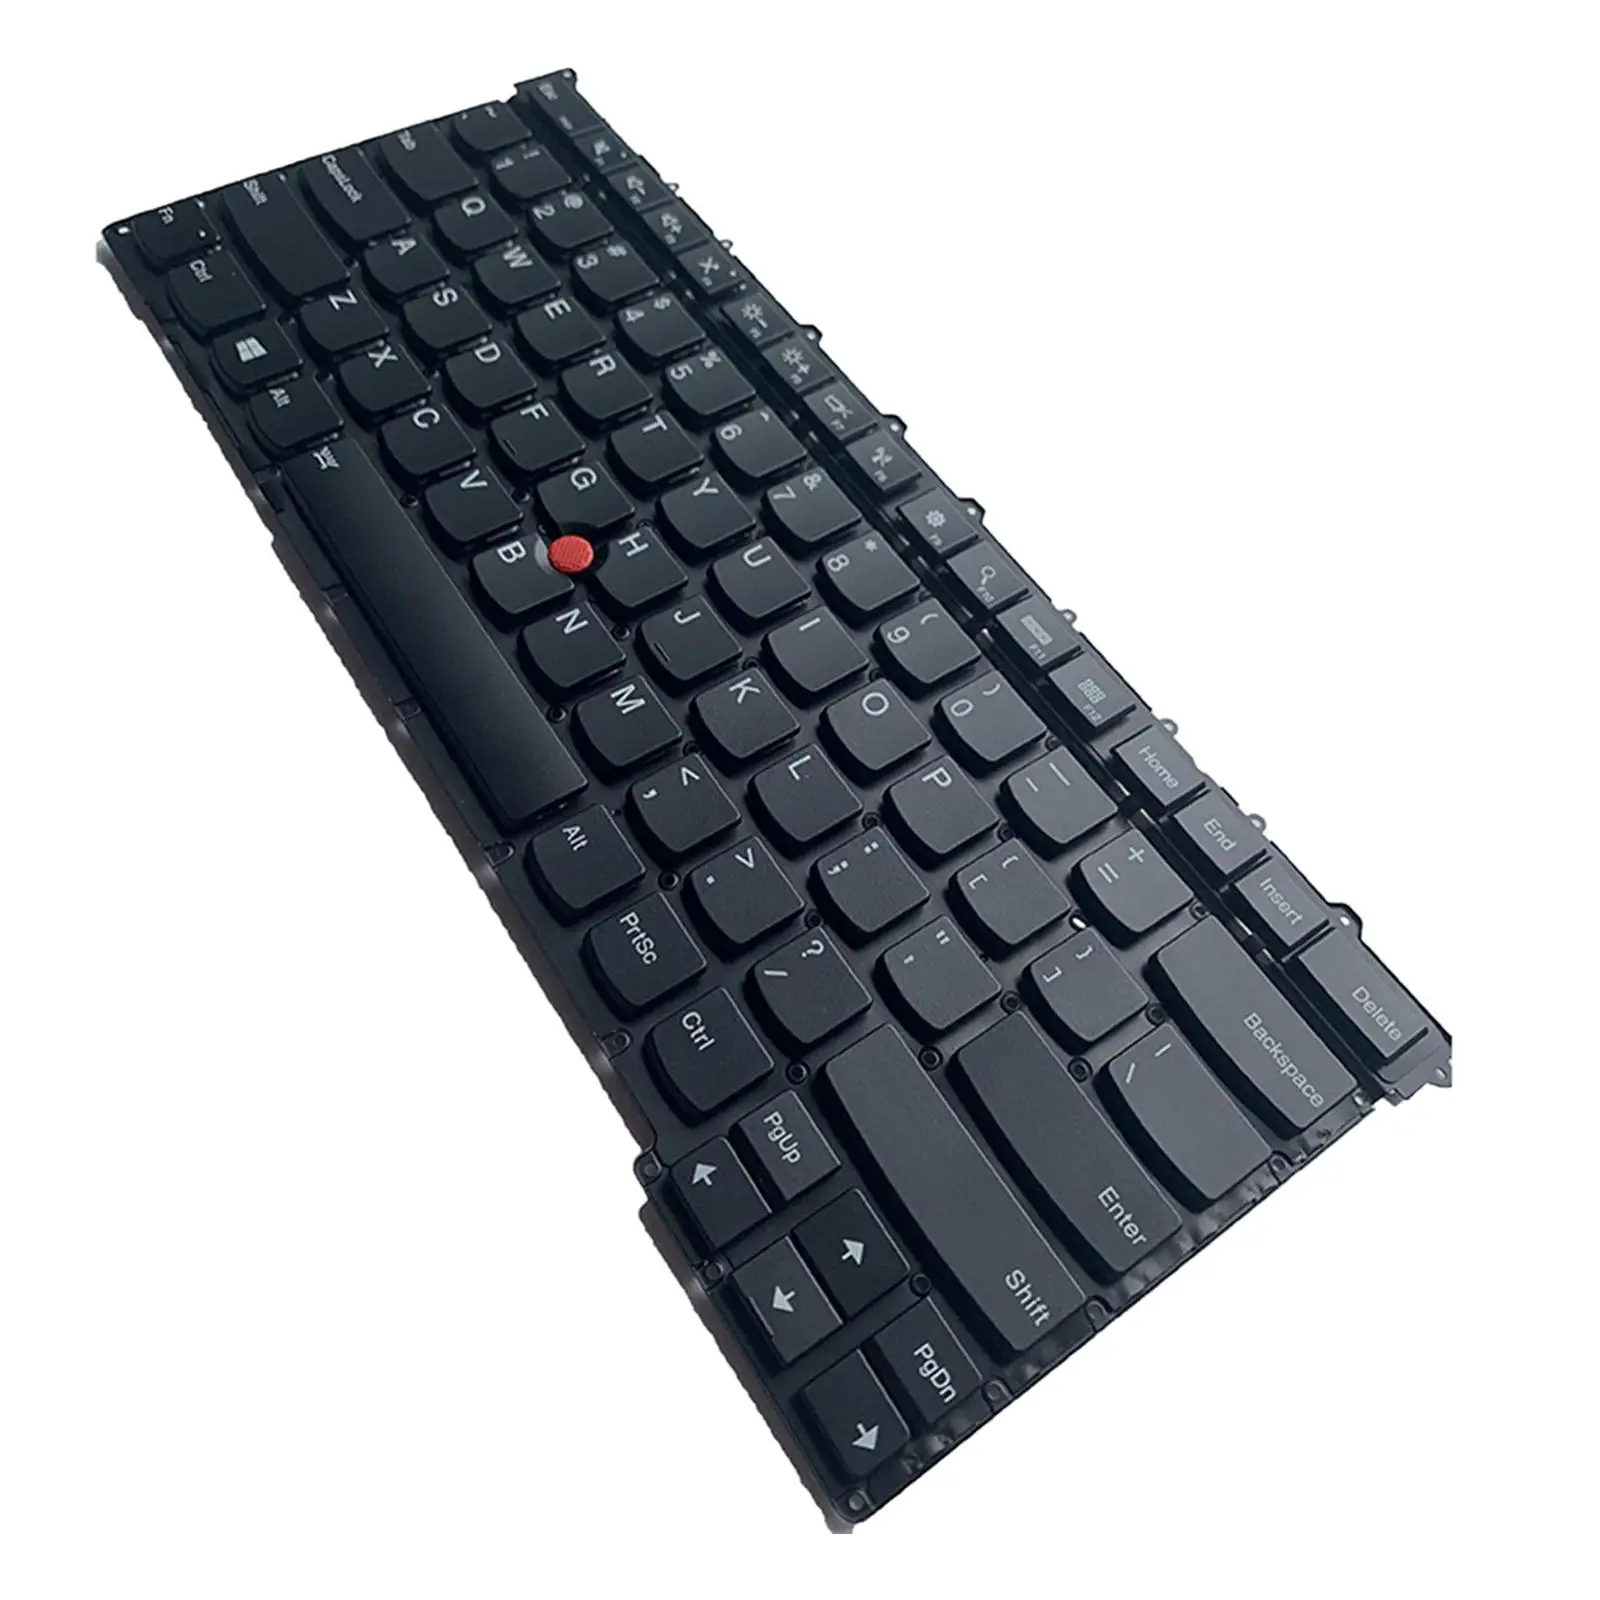 

Laptop Keyboard Black with Backlit for Lenovo ThinkPad x1 Carbon Gen 3 3rd 2015 Replace